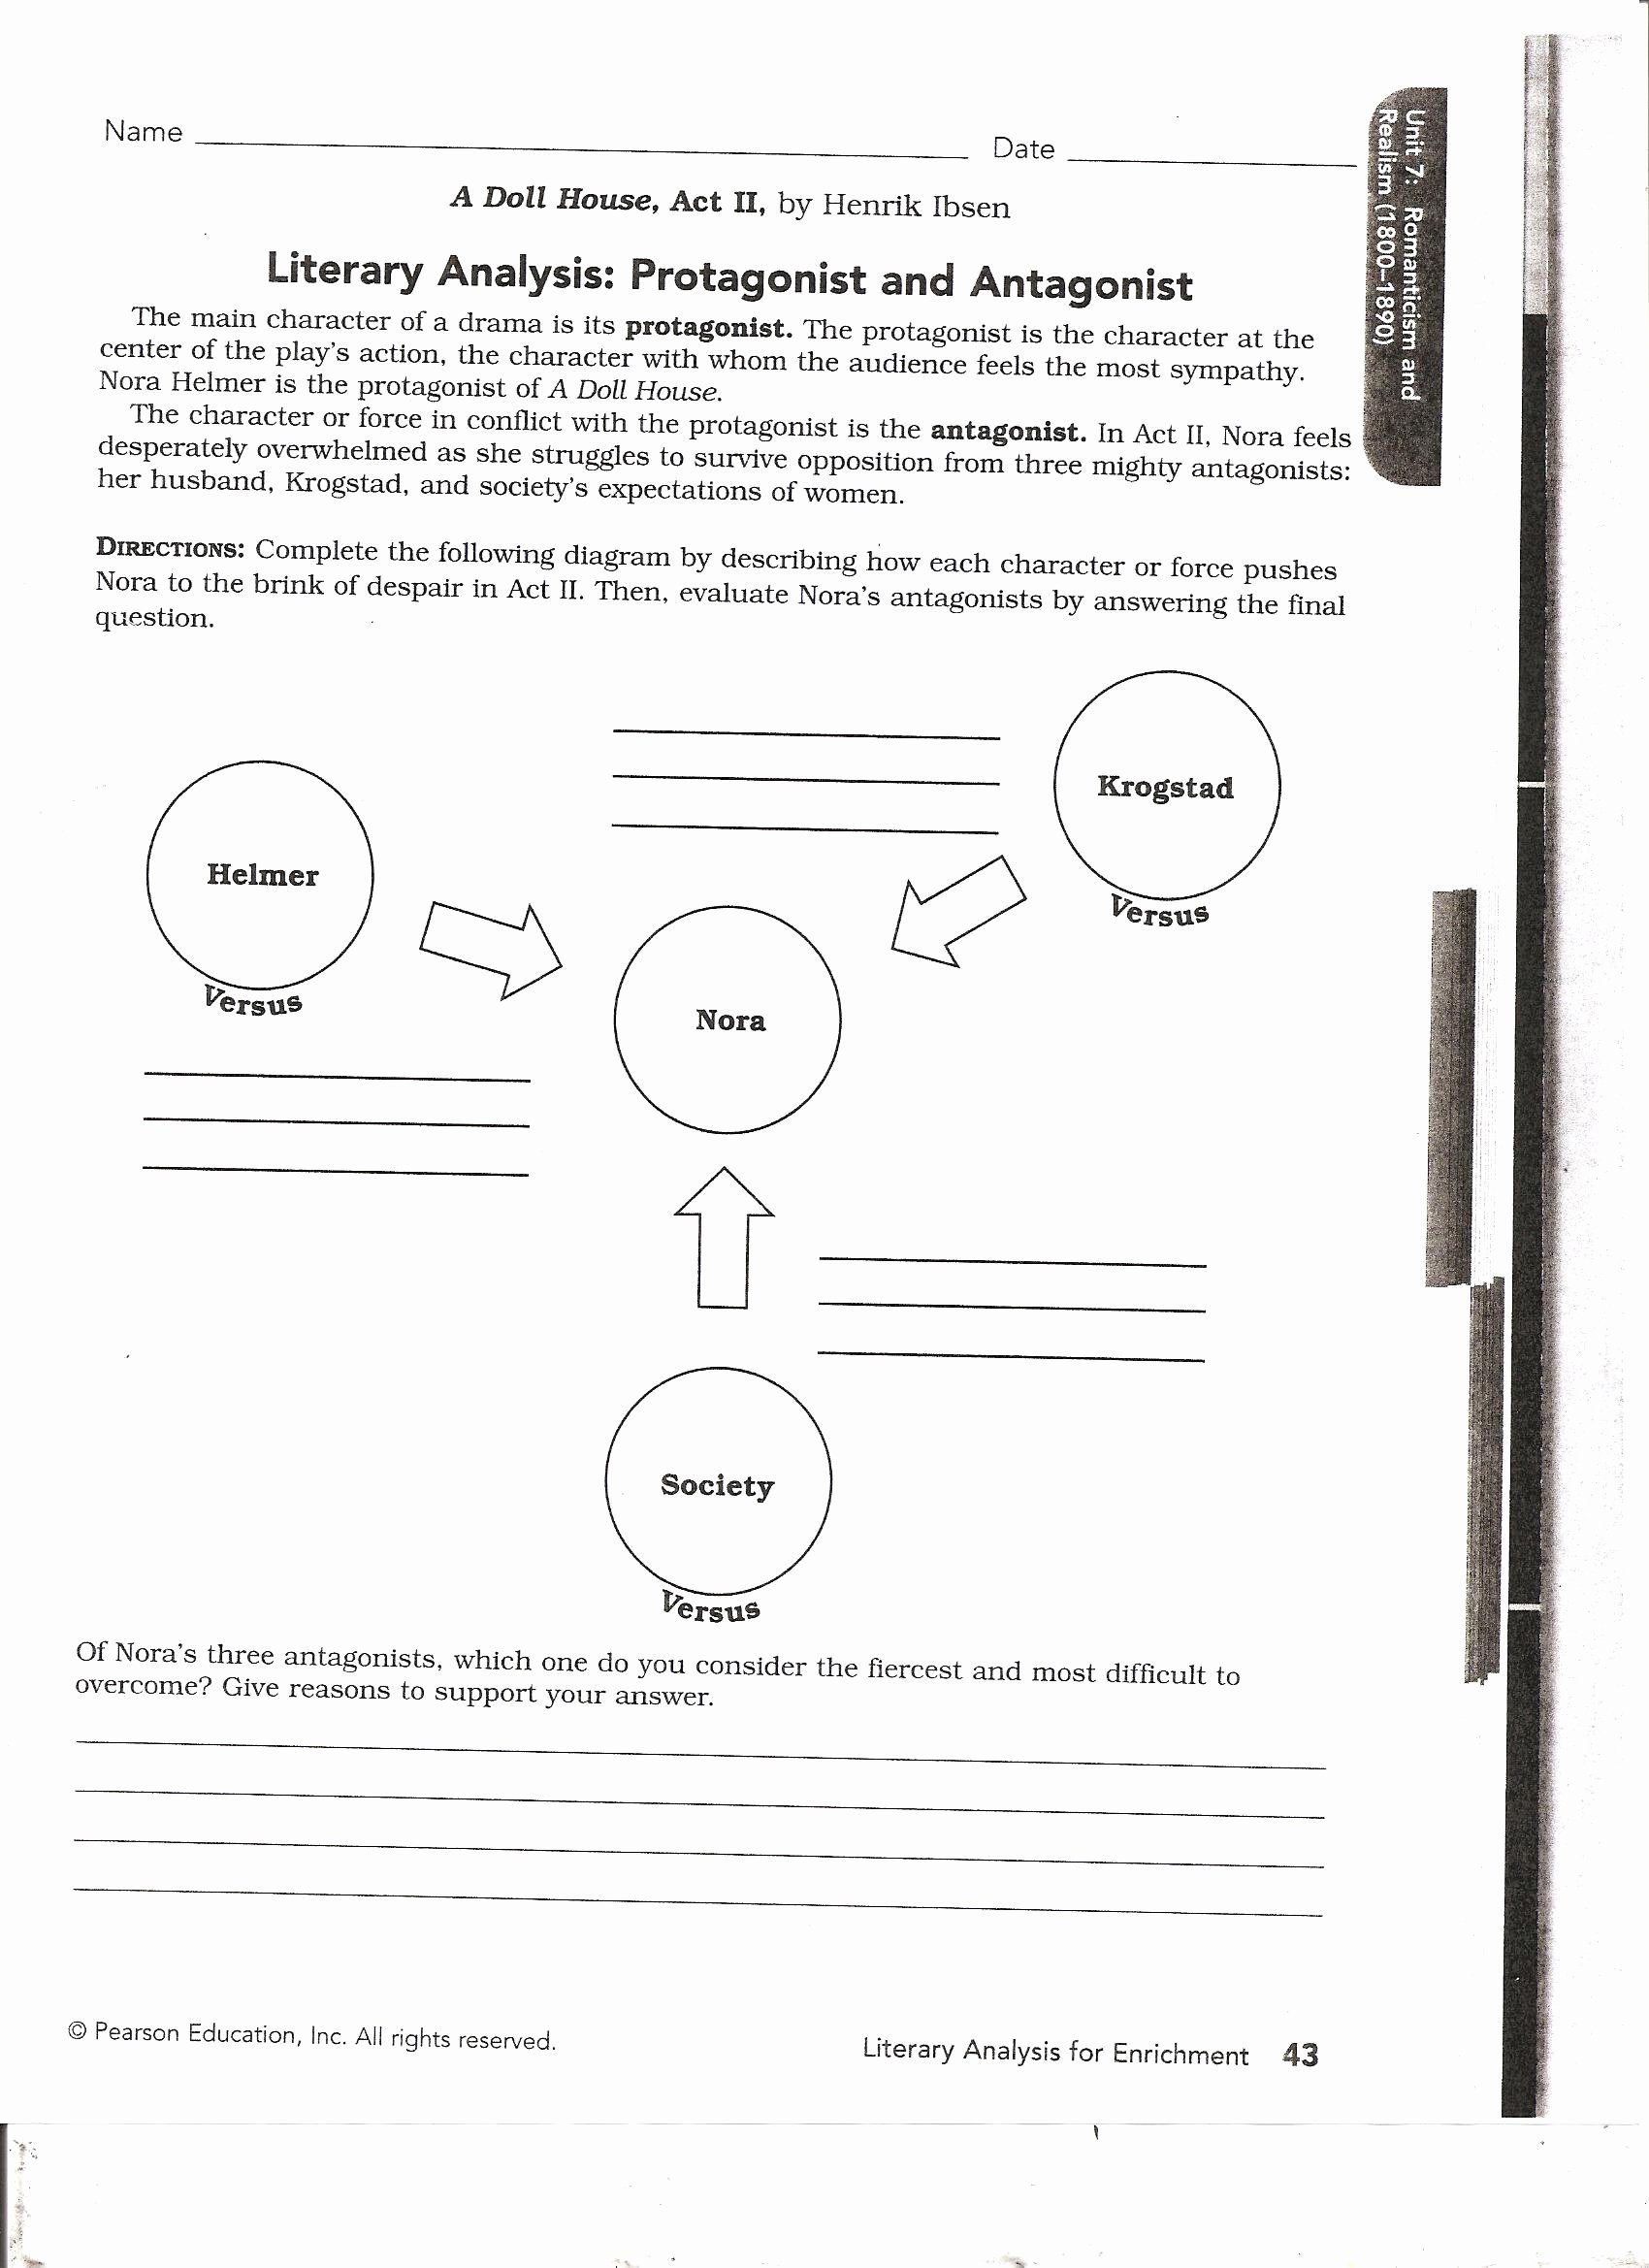 Protagonist and Antagonist Worksheet New Canyon High School Romanticism and Realism